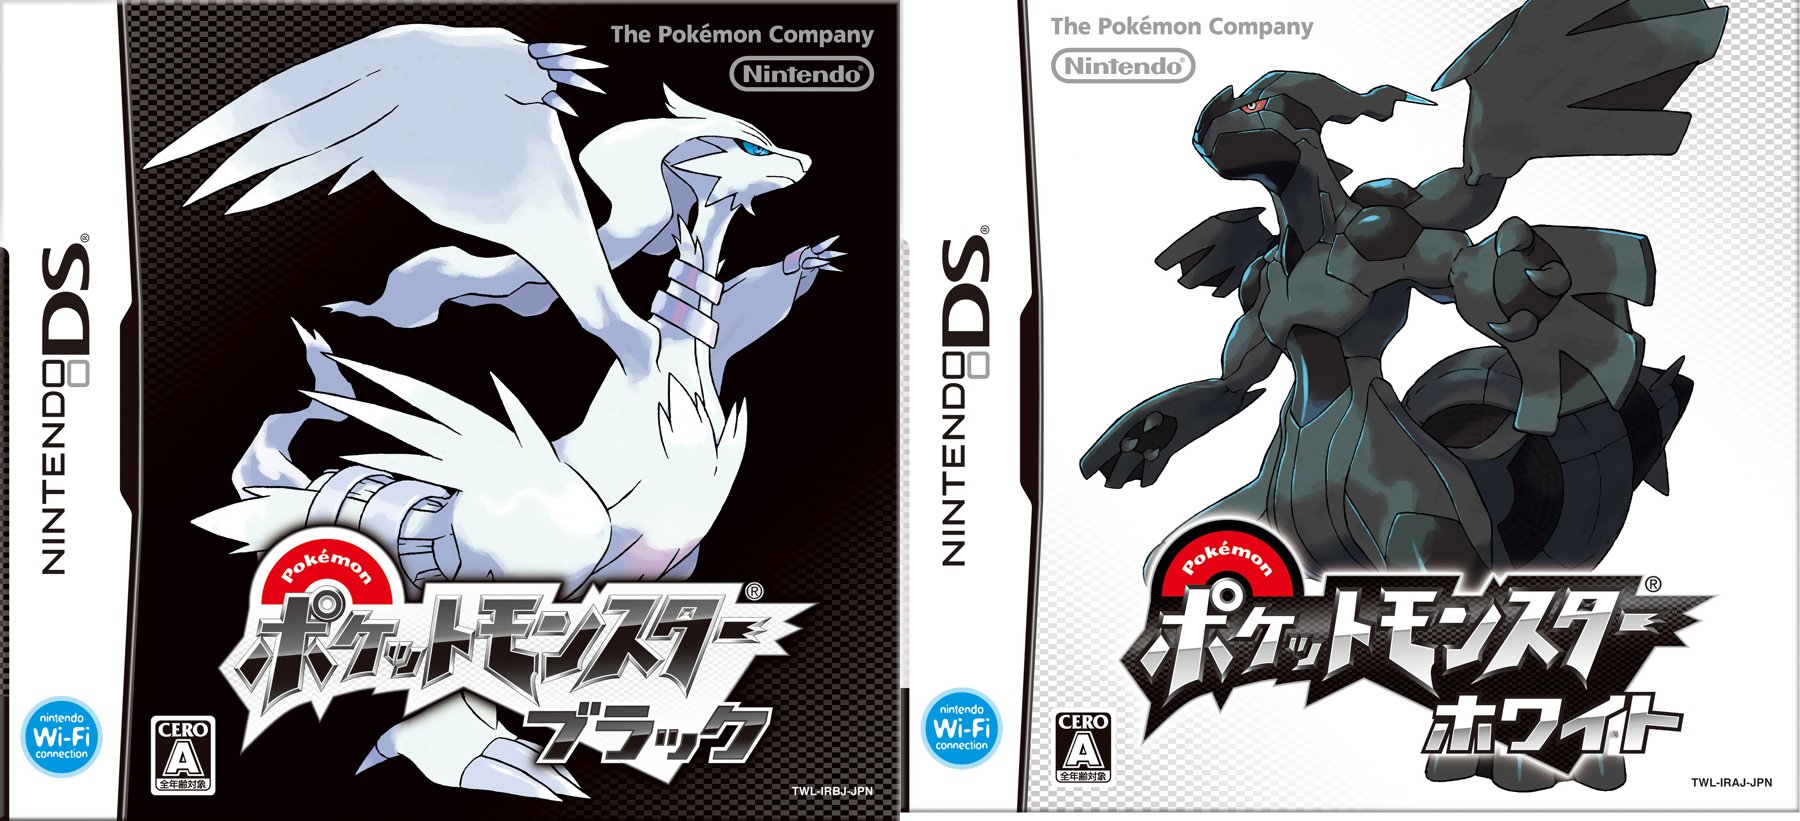 Bulbagarden - The original Pokémon community on X: Mega Charizard X or  Mega Charizard Y Which one is your favorite?  / X